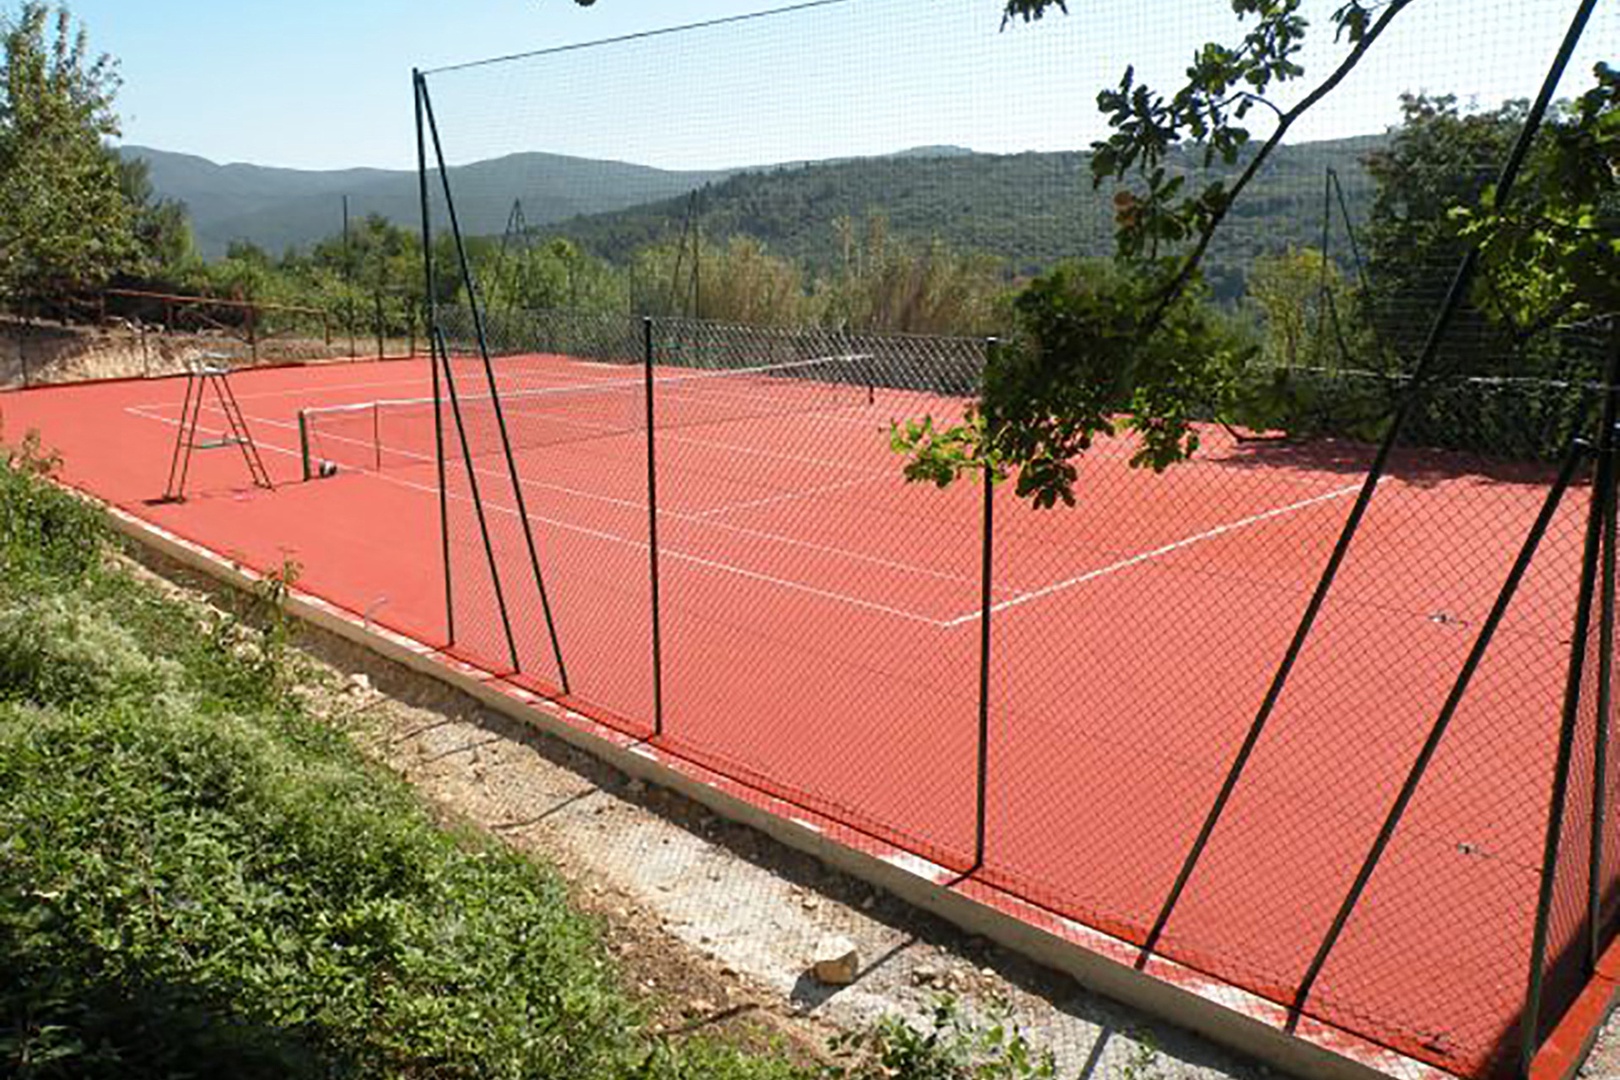 Play tennis on the private clay court.